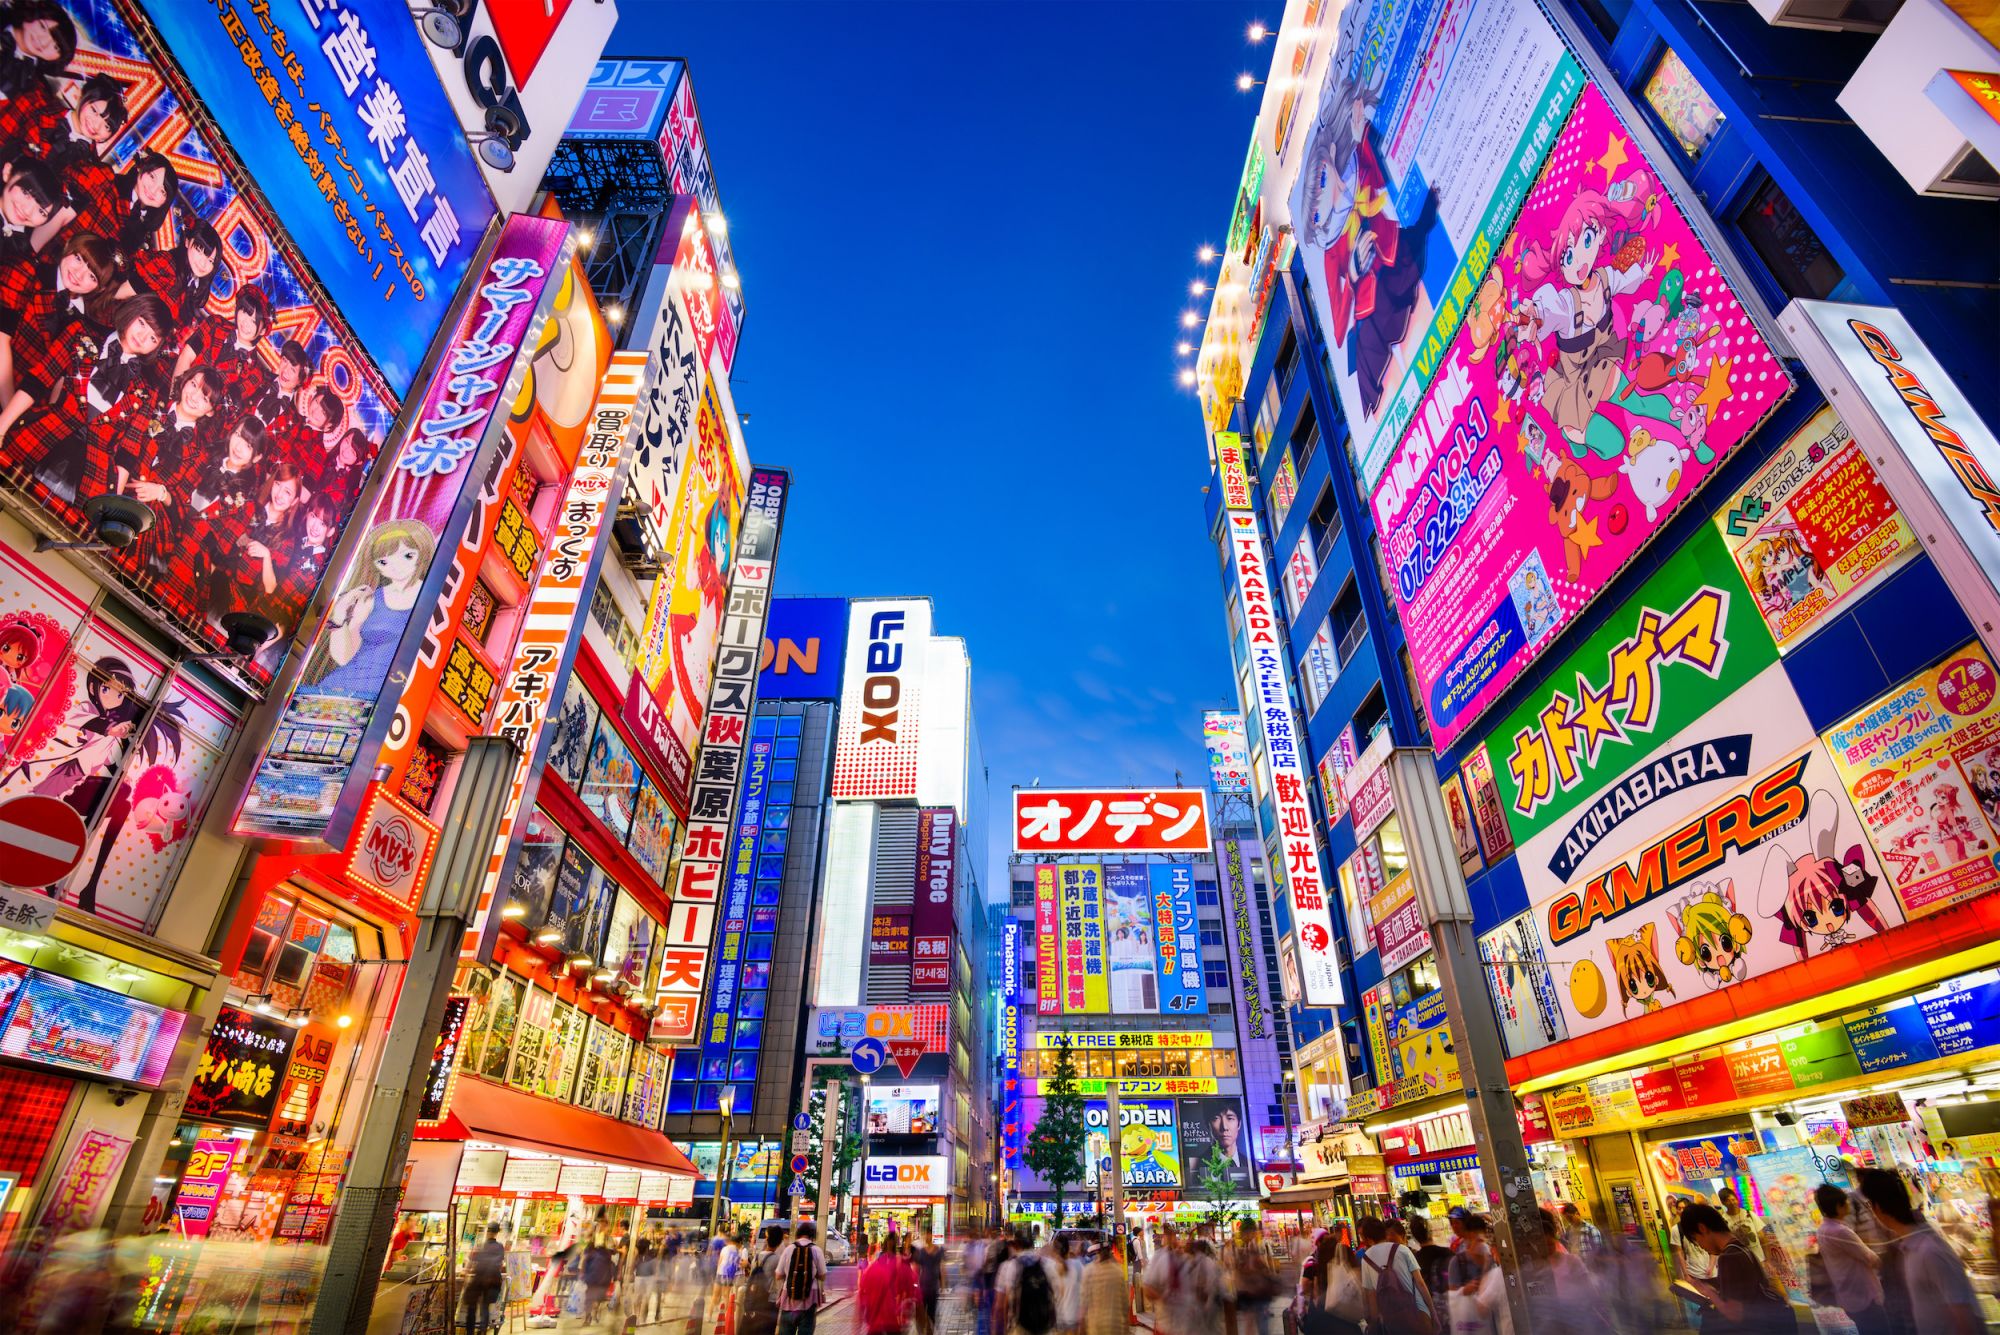 What to see in Japan